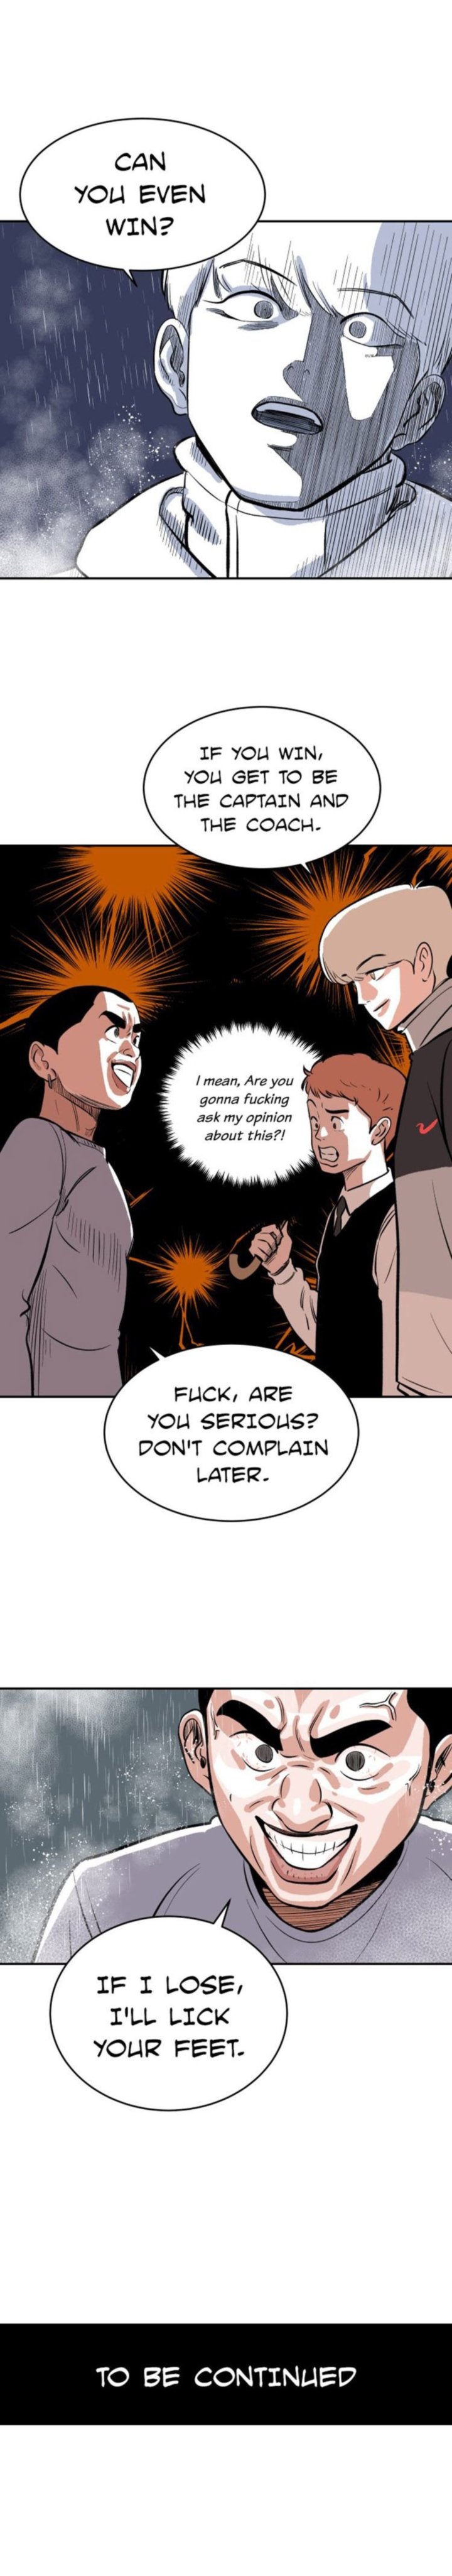 Build Up Chapter 9 Page 14